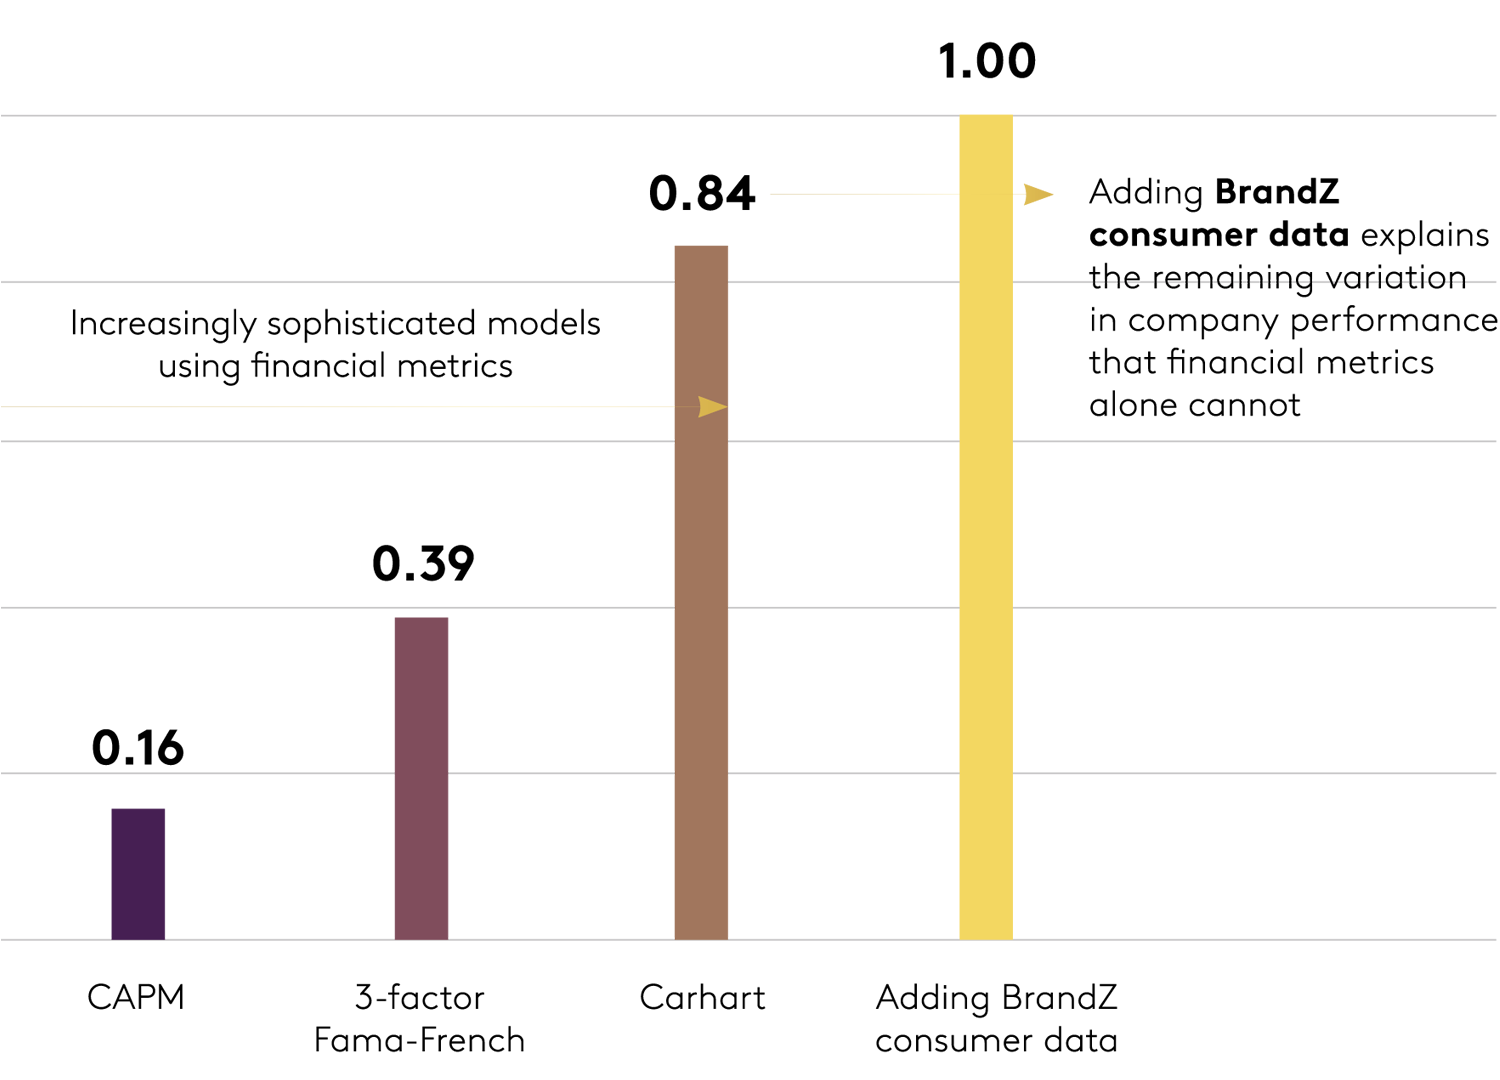 The Kantar BrandZ Difference variable is the No. 1 contributor to the model.